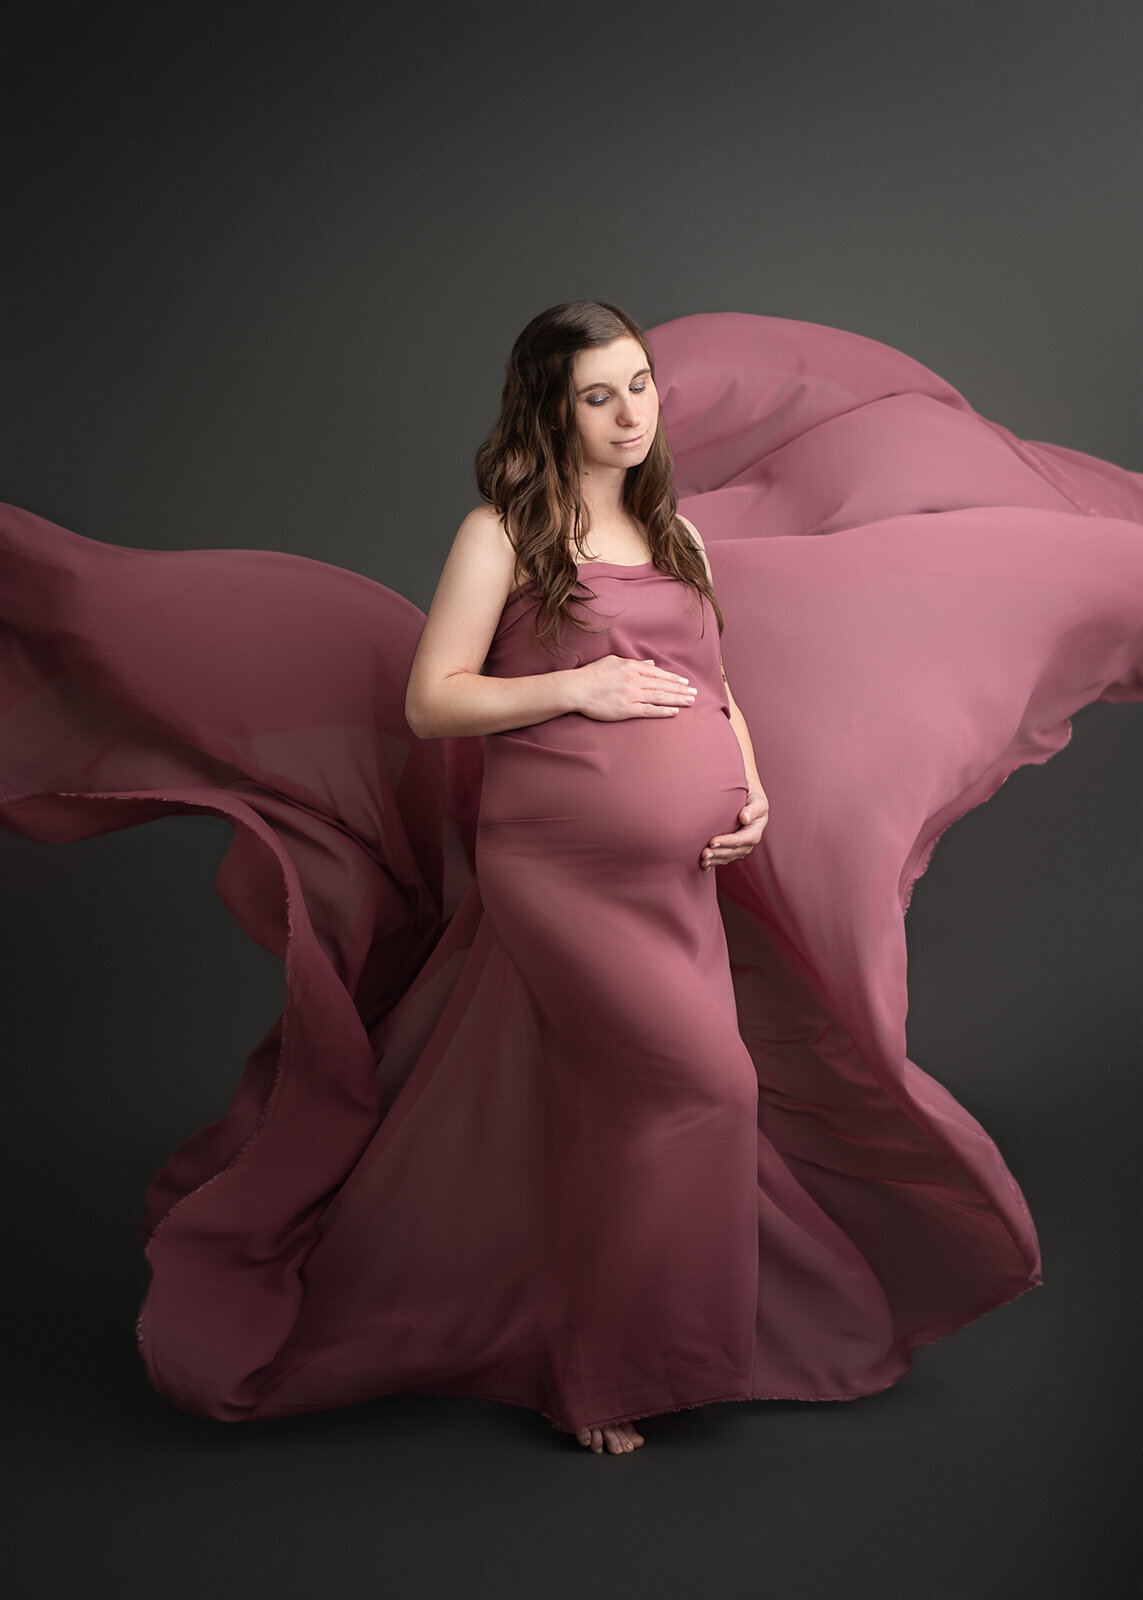 mom in purple draping fabric by st. louis maternity photographer